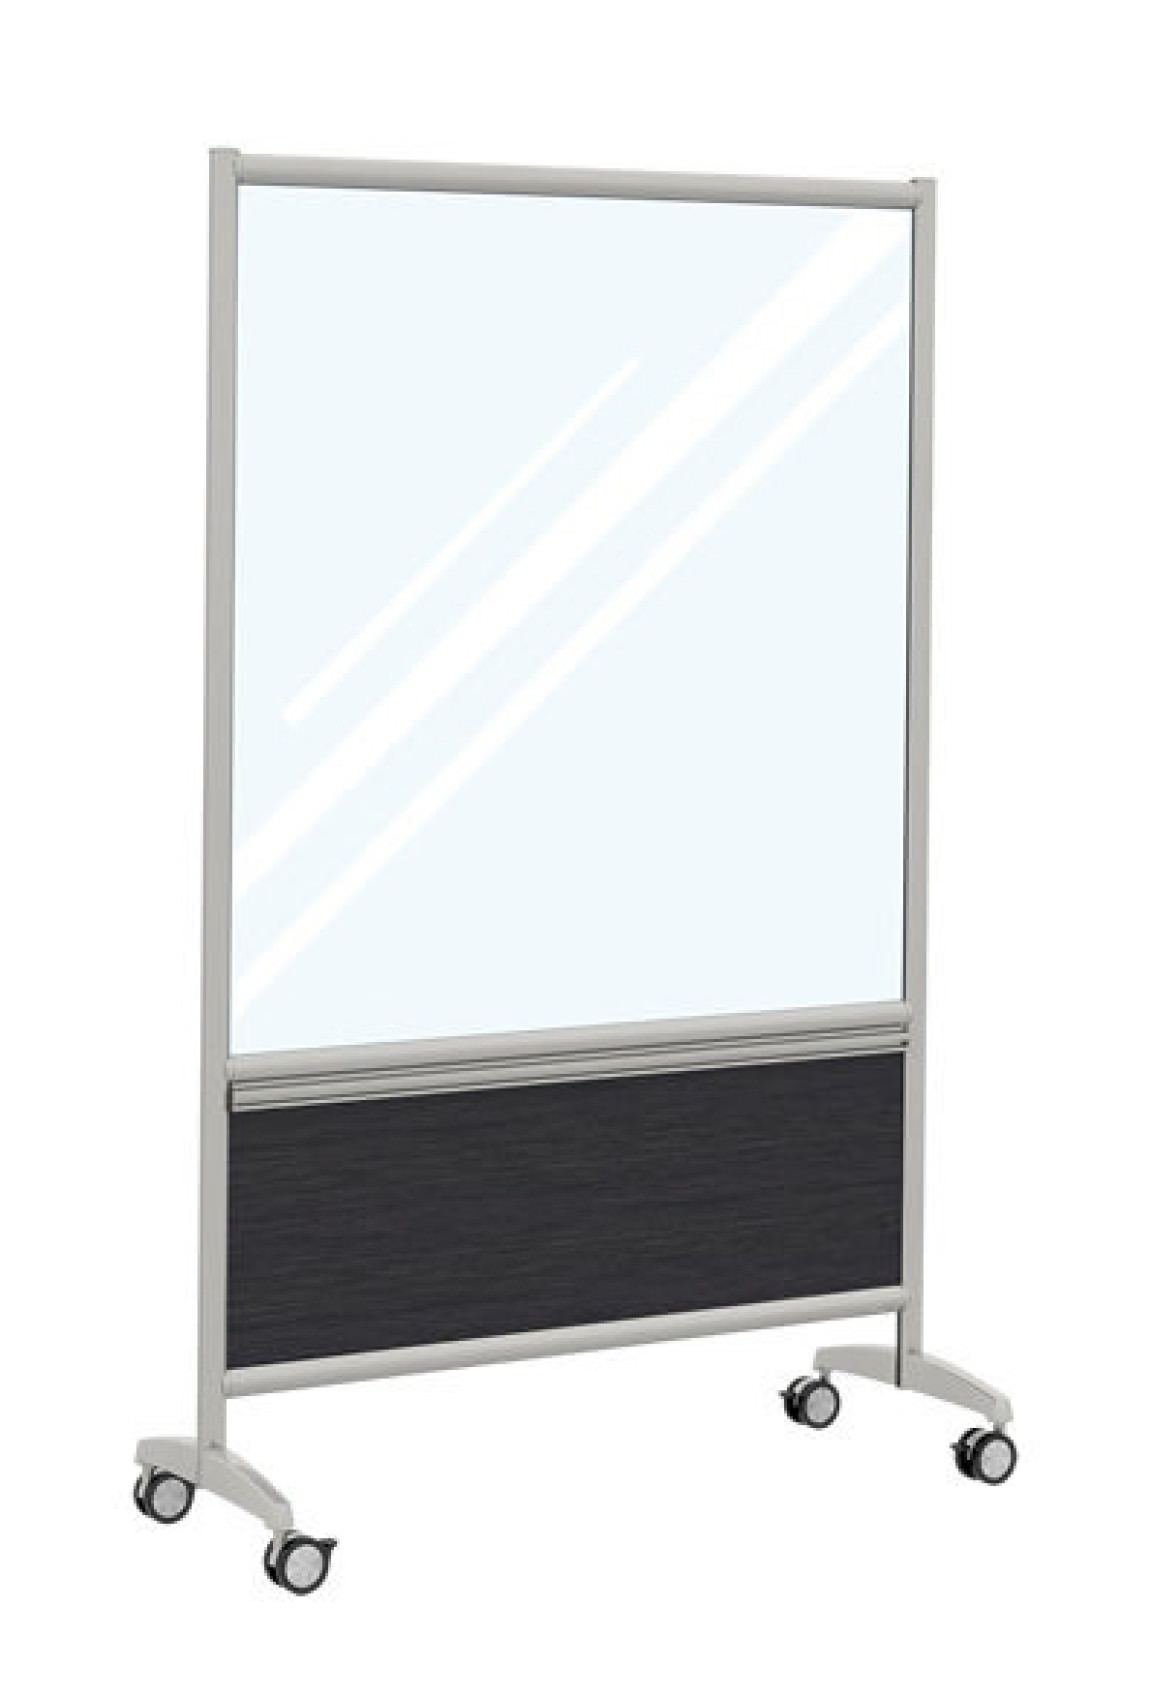  Mobile Glass Dry Erase Board with Rolling Stand - 48x36,  ZHIDIAN Magnetic Movable Large Glass Whiteboard on Wheels, Includes 4  Magnets 2 Markers 1 Eraser : Office Products